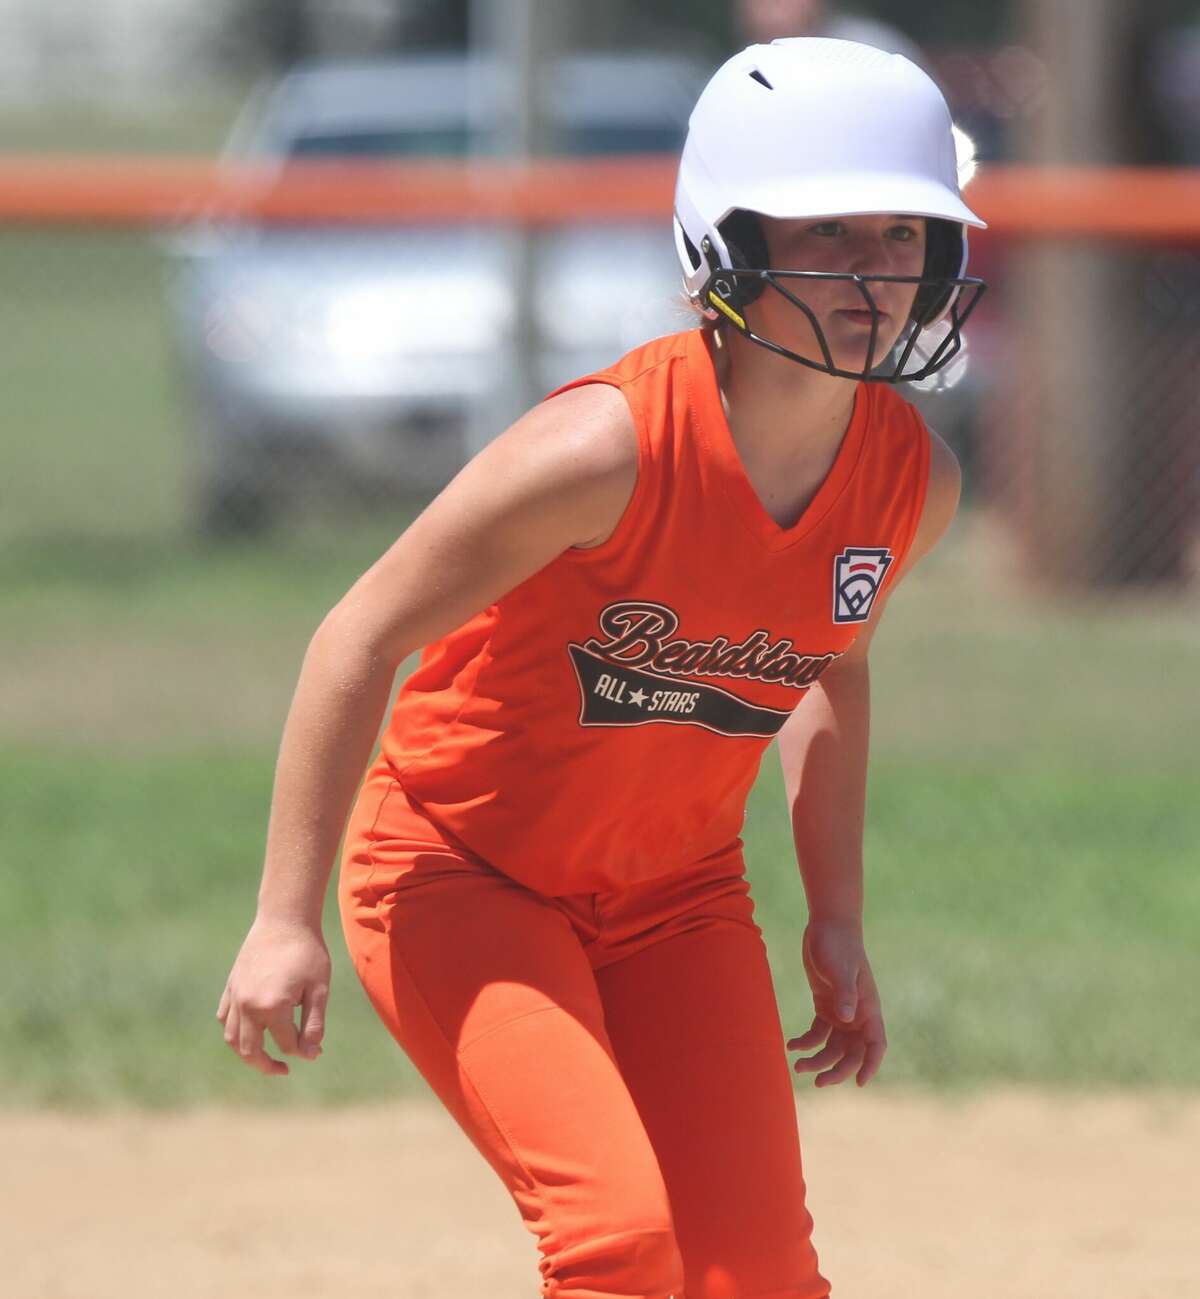 Action from the Beardstown 11-12 All-Star softball team's 12-2 win over Rushville in the district championship game in Beardstown last week